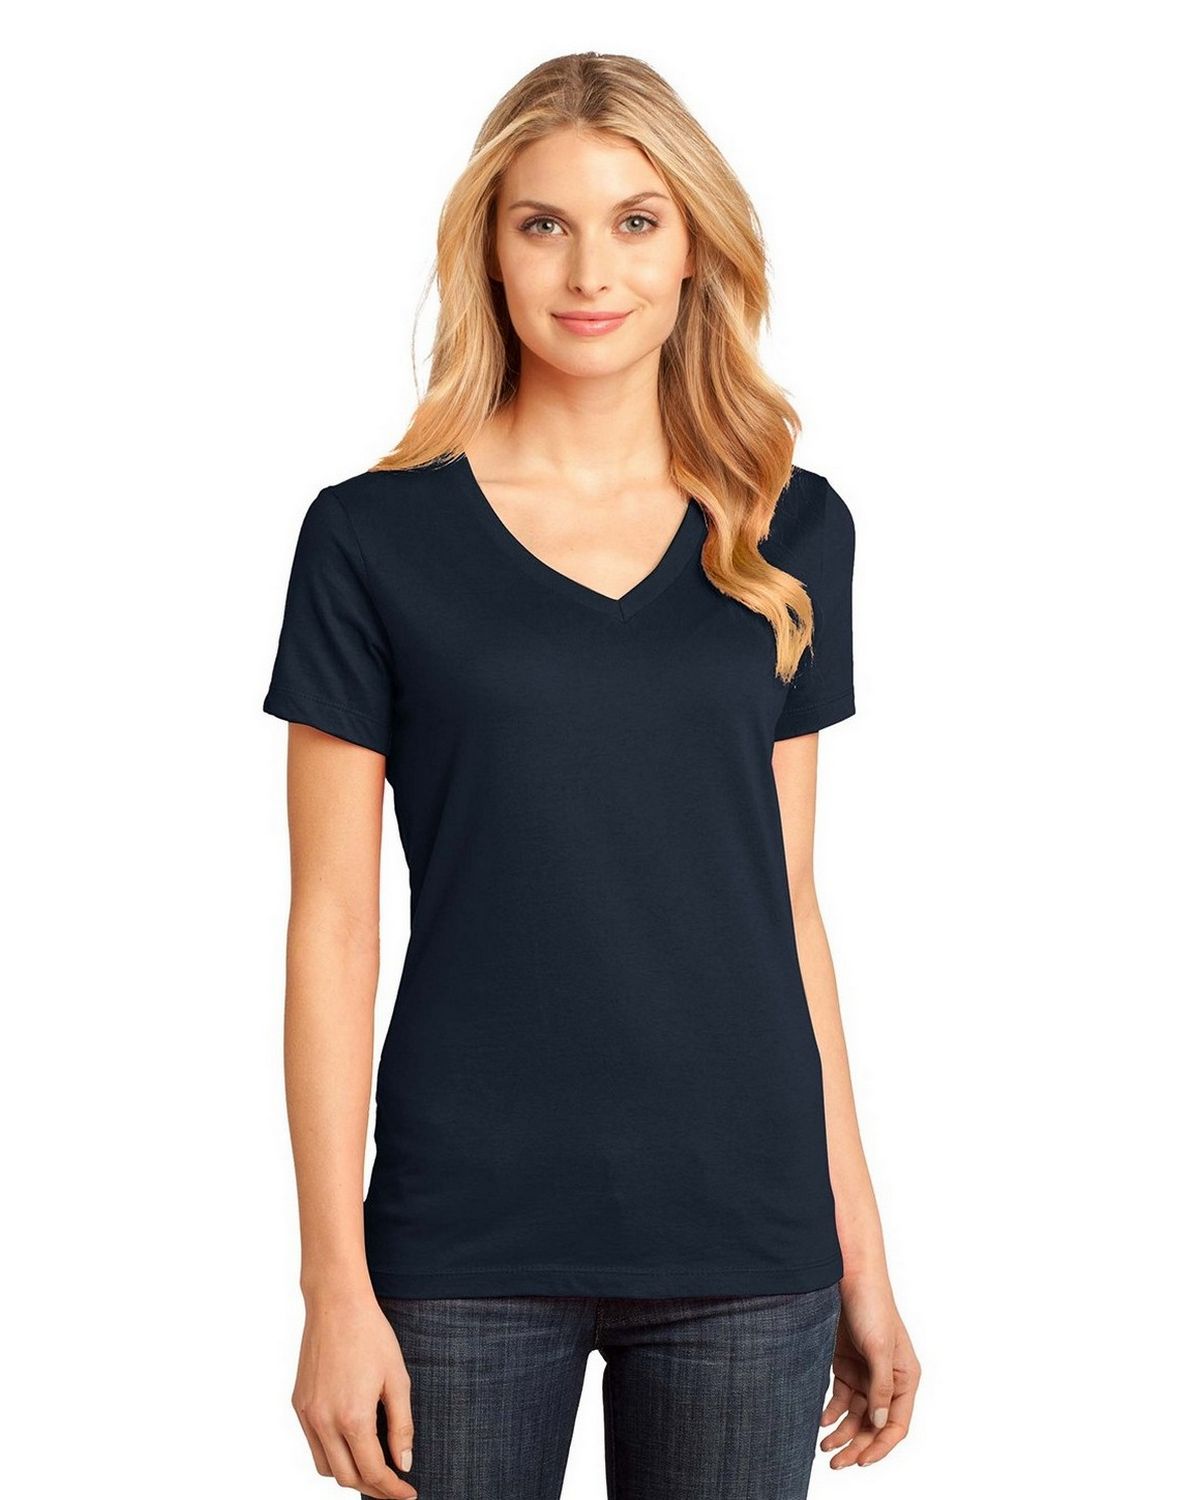 Buy District Made DM1170L Ladies Perfect V-Neck Tee